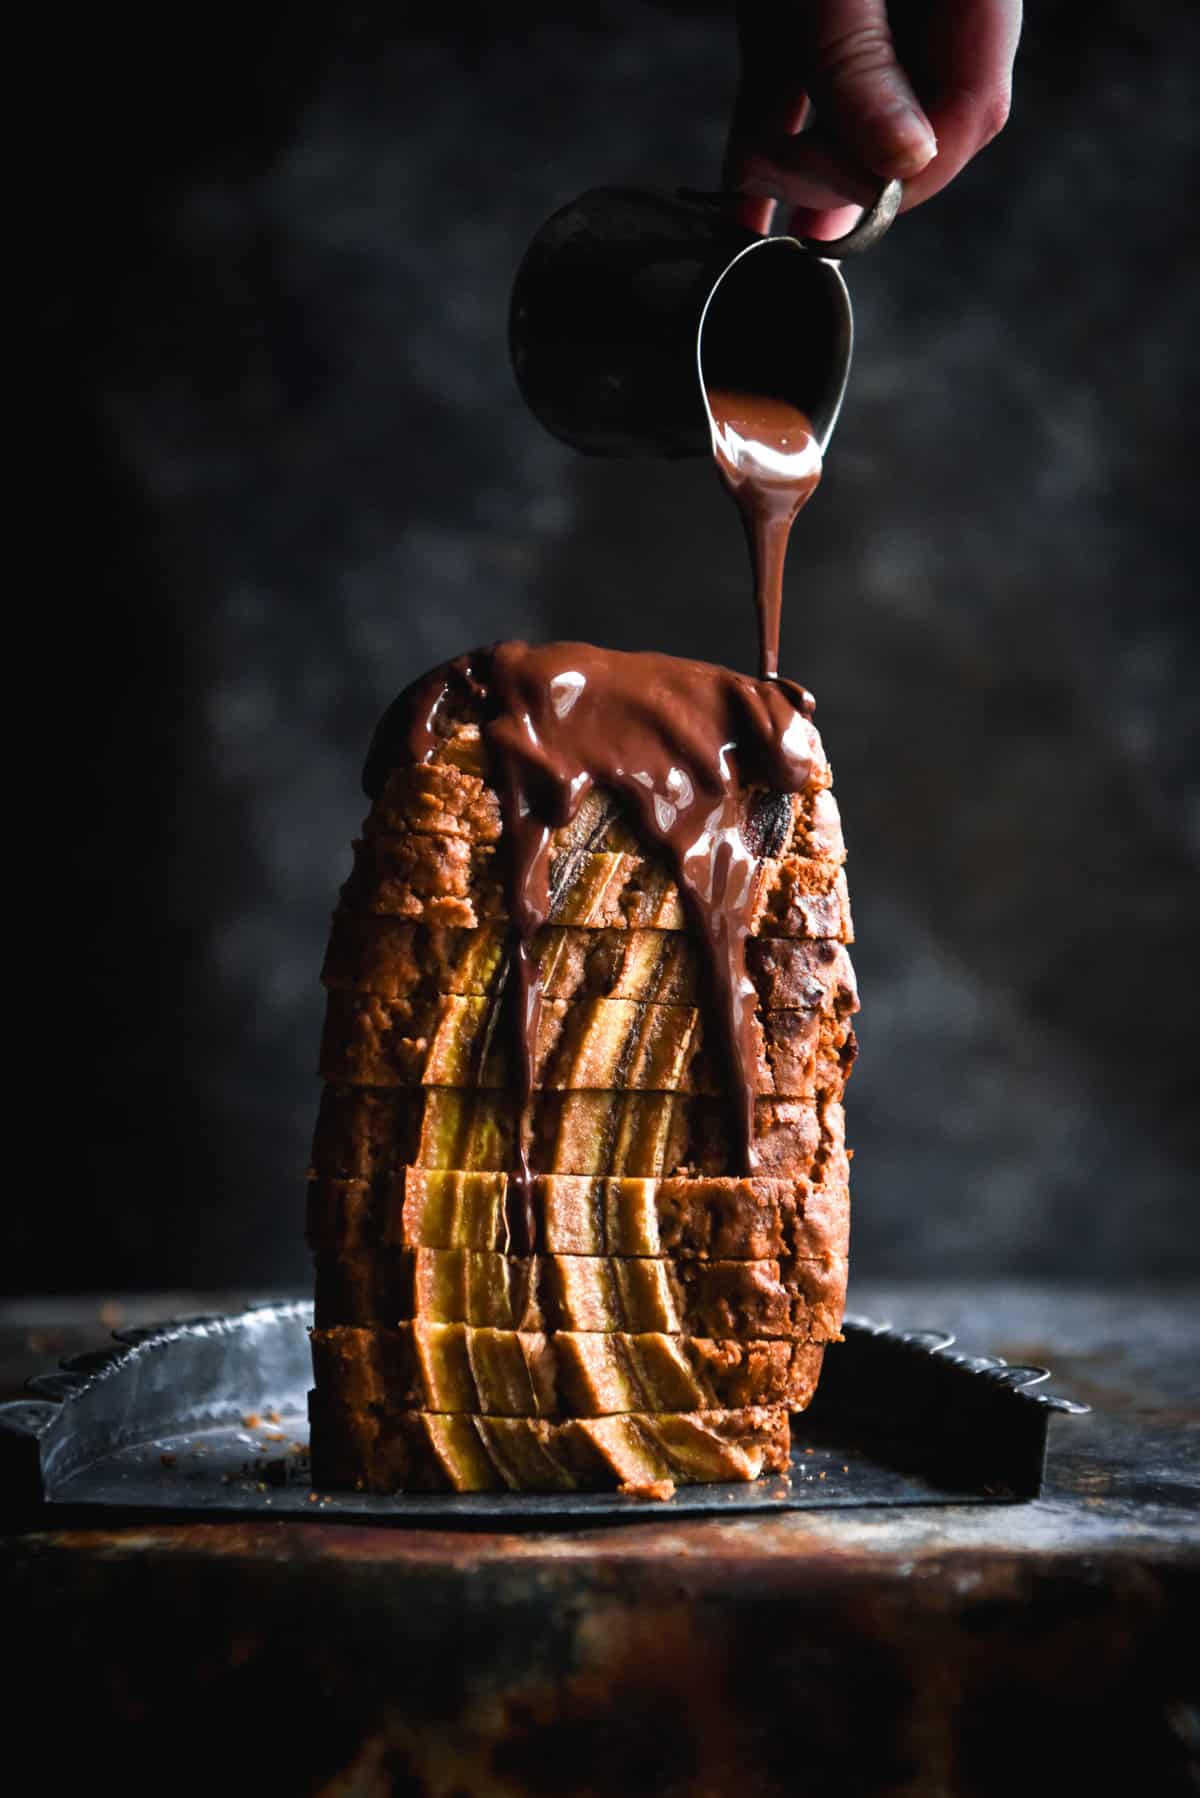 A side on view of a sliced loaf of low FODMAP banana bread standing upright against a dark blue backdrop. A hand extends out from the top right of the image to drizzle vegan chocolate sauce down the loaf.